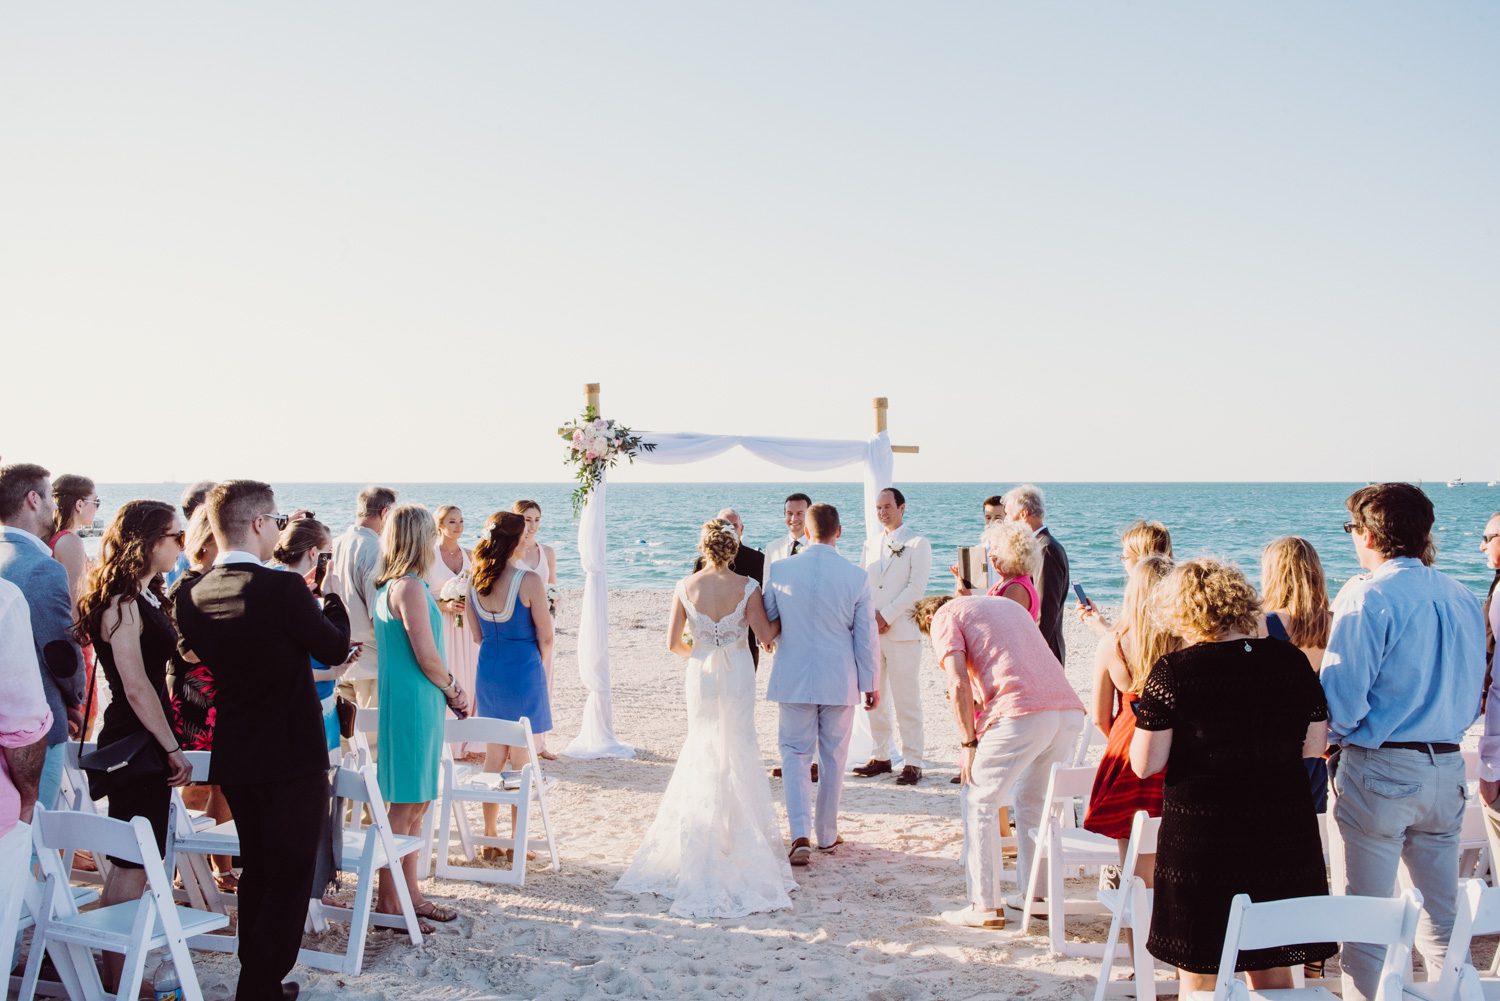 A sunset beach wedding ceremony with a bride and groom in Key West.